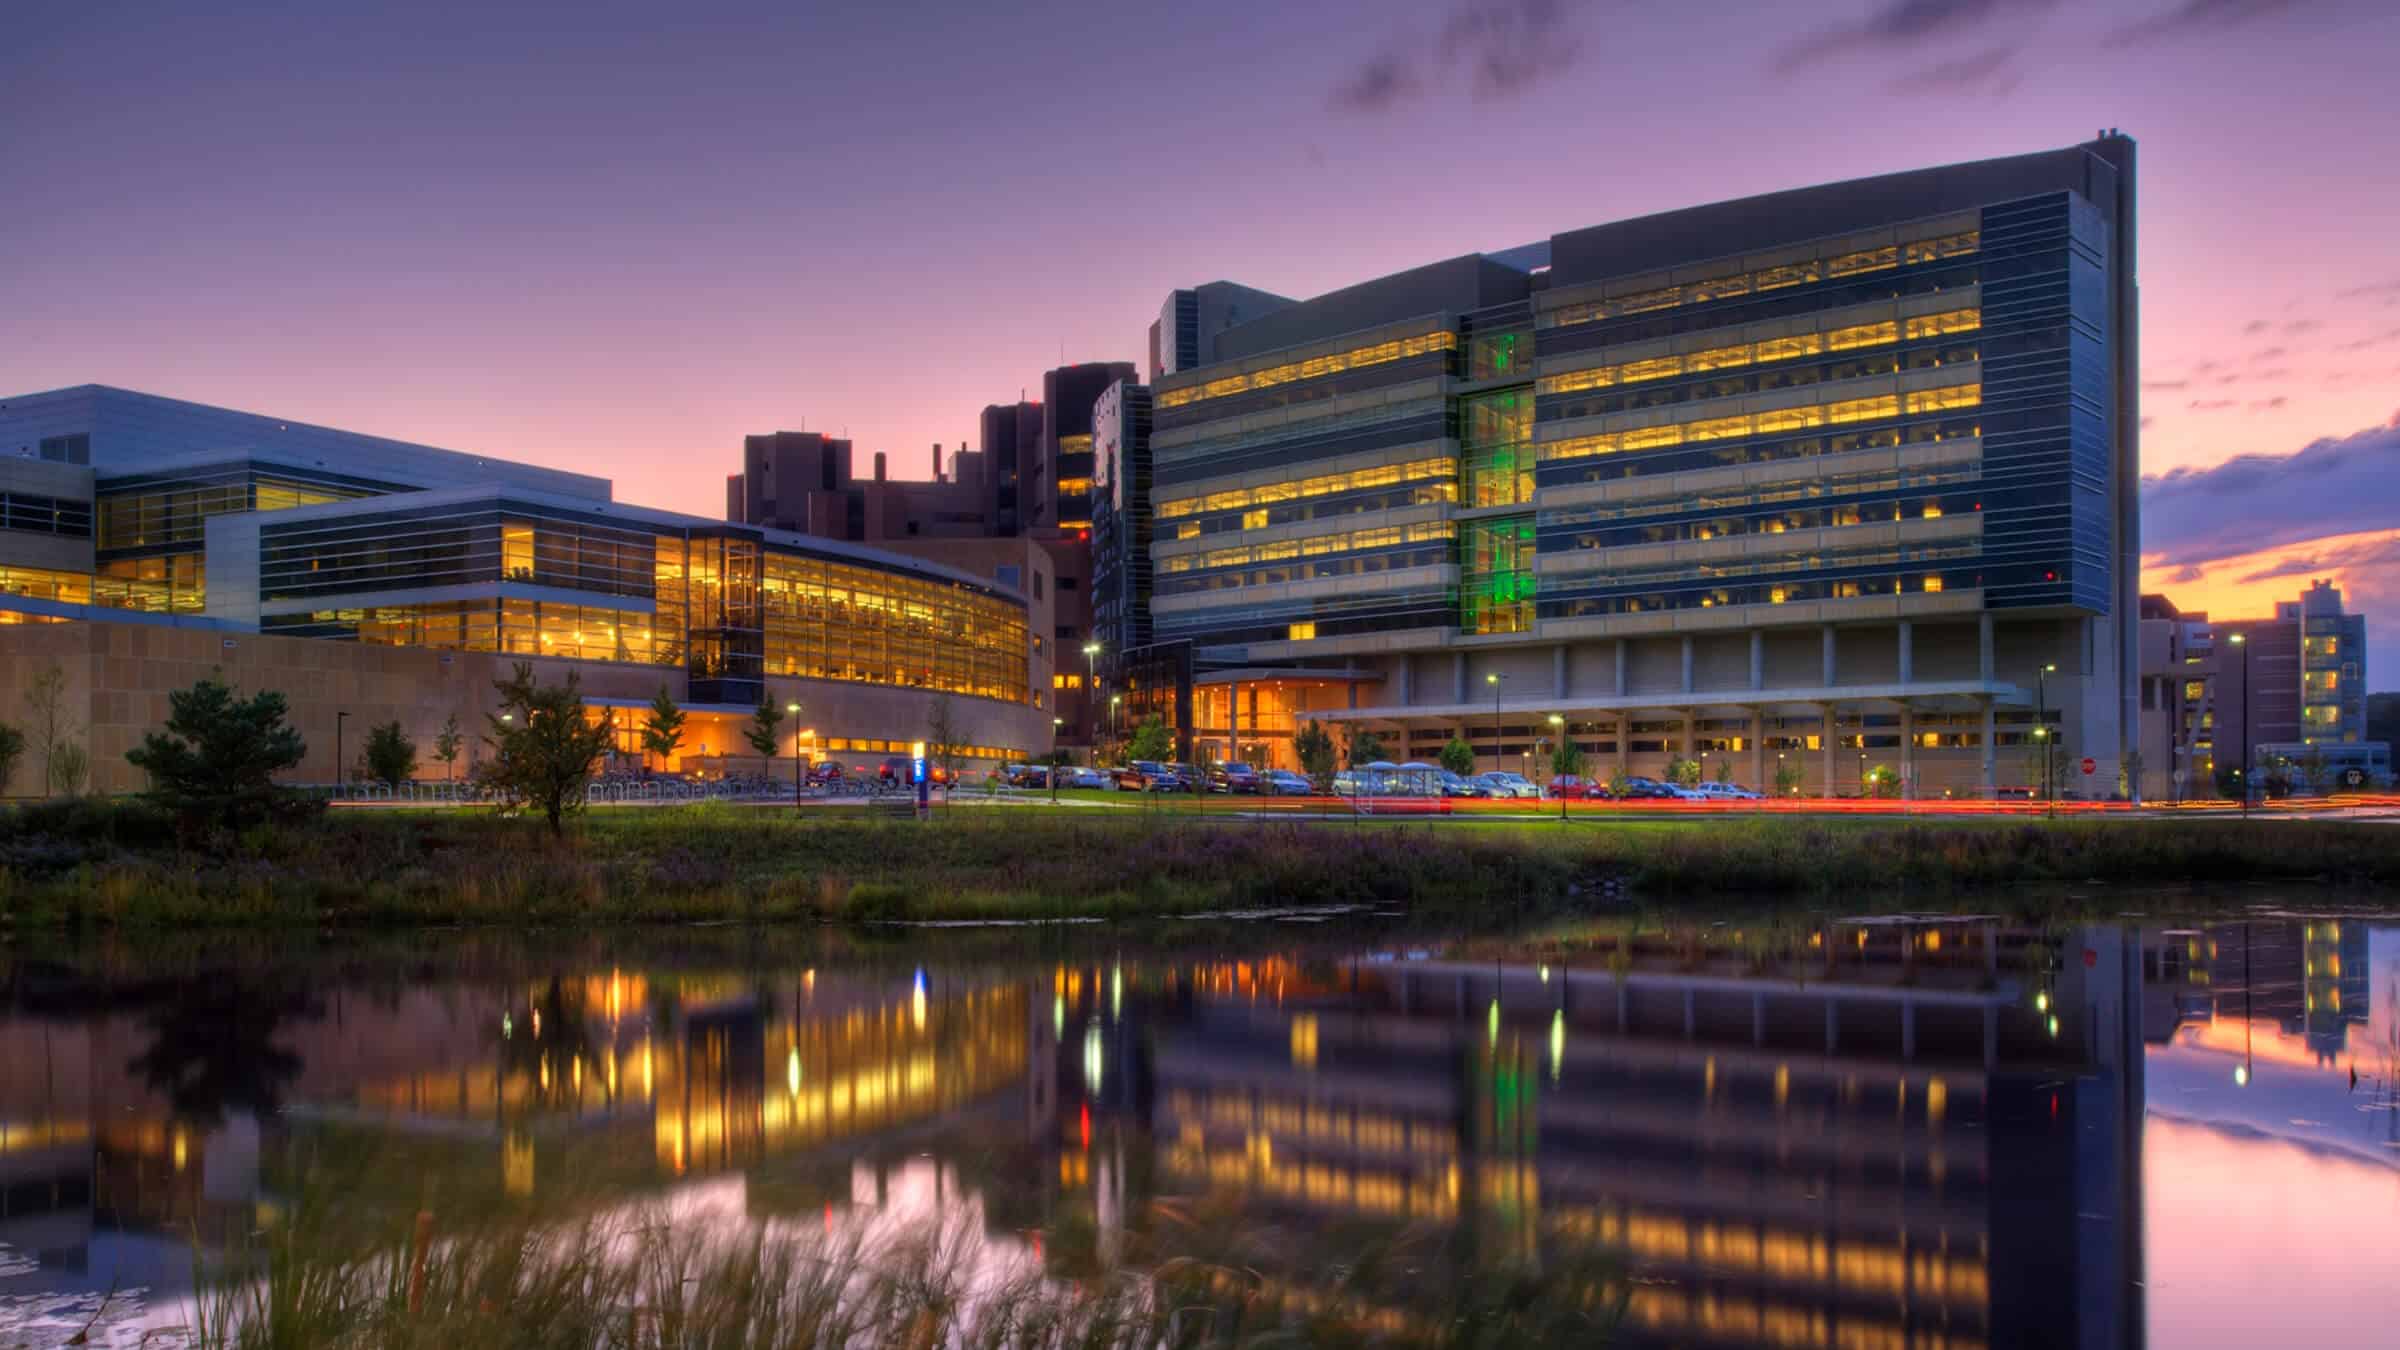 Wisconsin Institutes for Medical Research - Exterior View of Building from Lake, Lit at Dusk